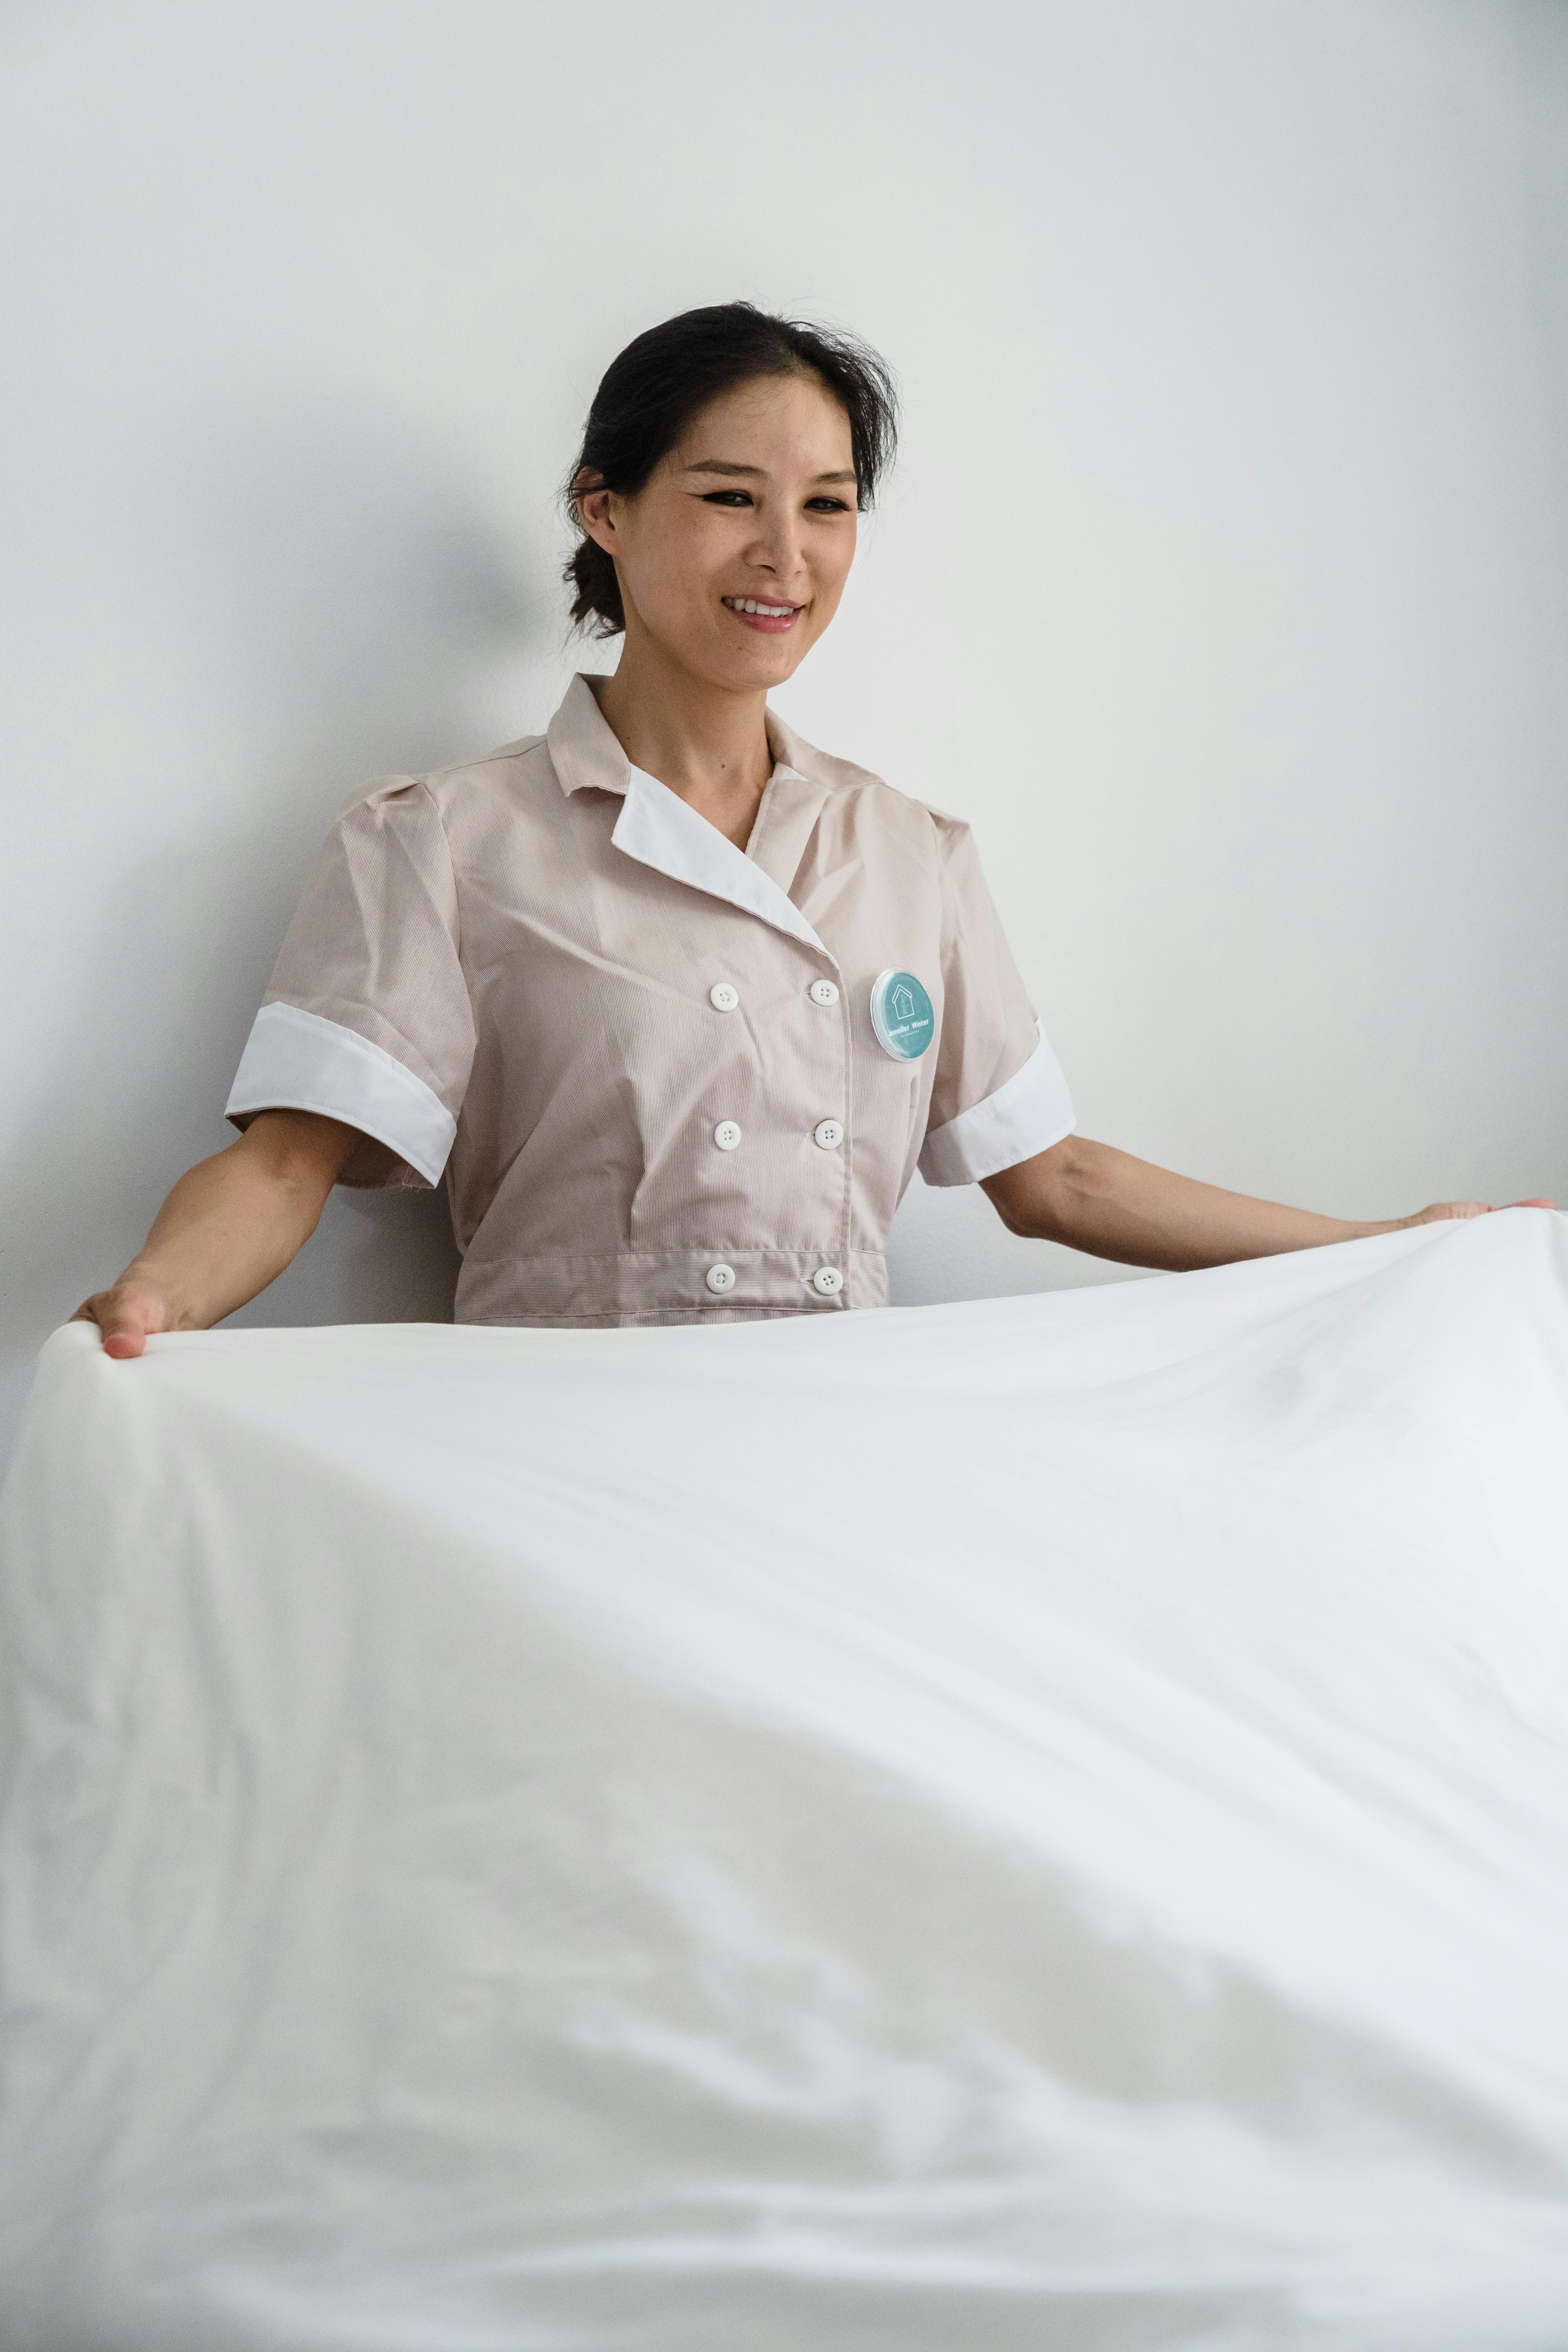 Cropped View Housemaid White Bed Sheets Laundry Stock Photo by